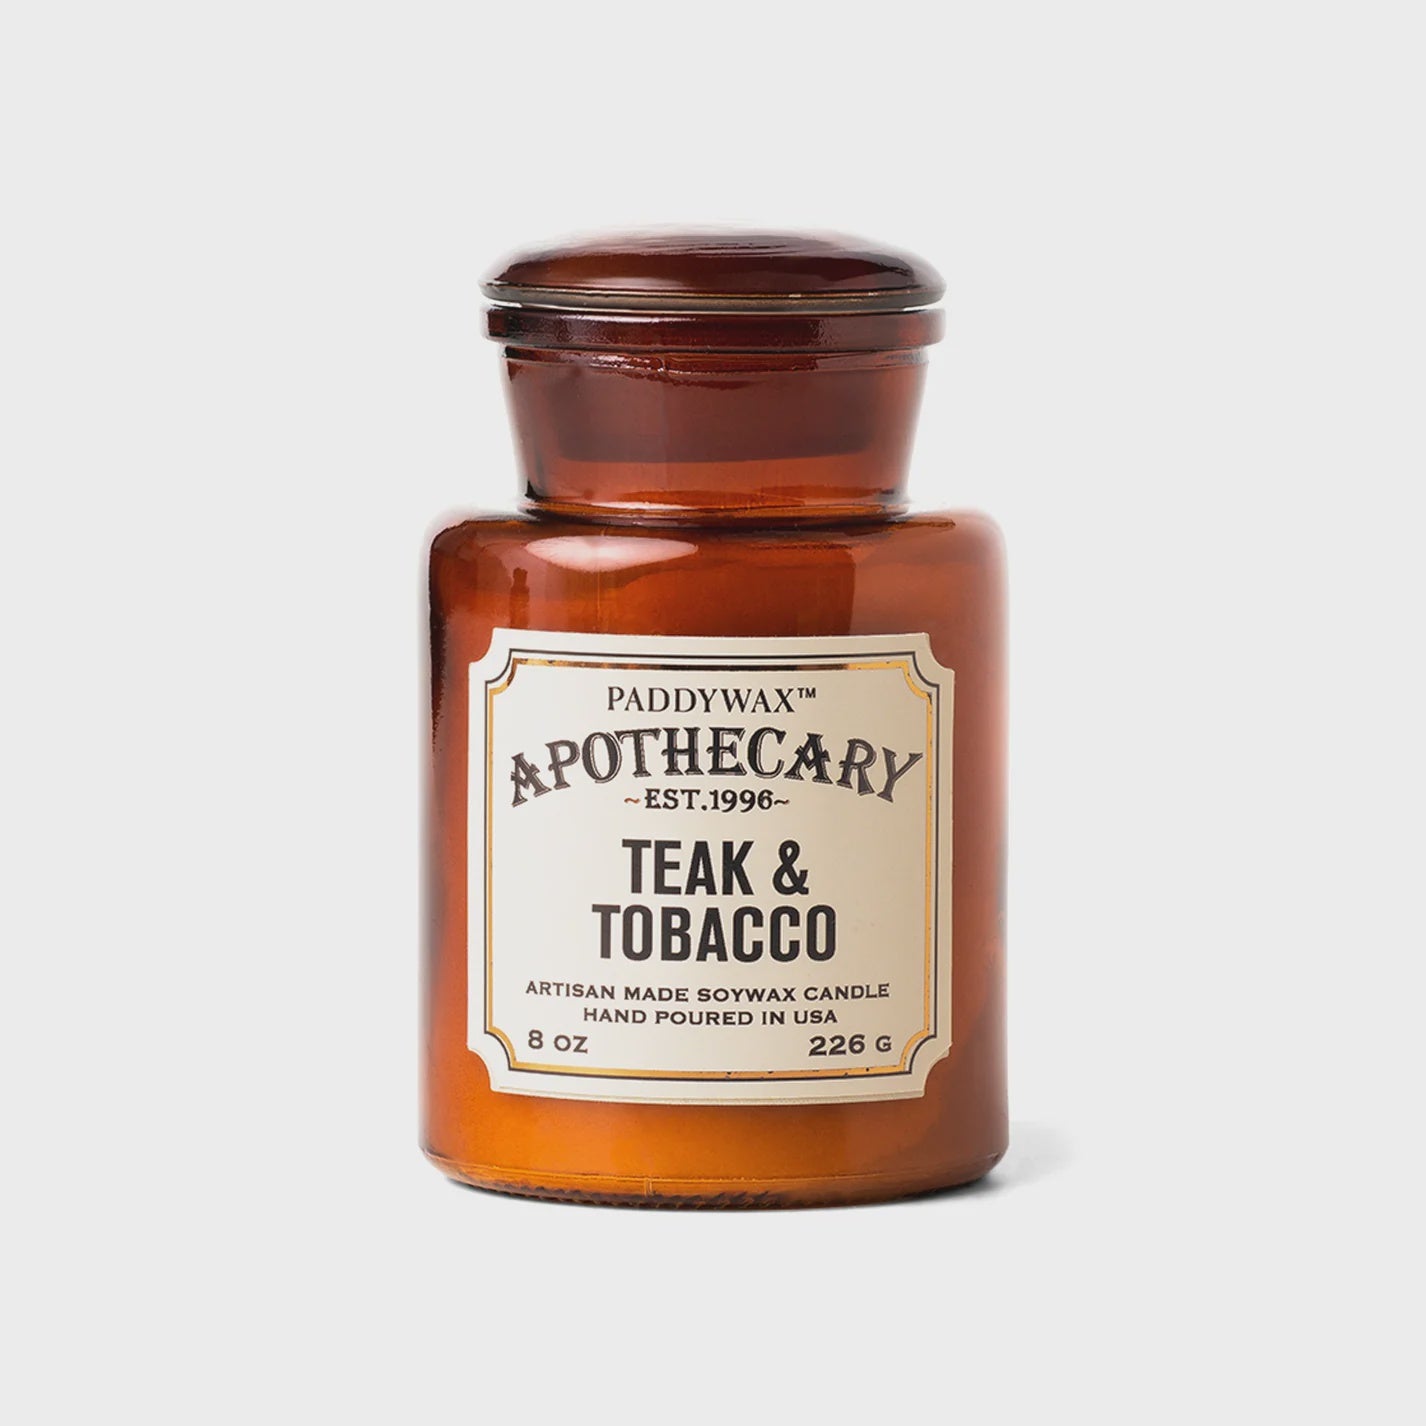 Paddywax Apothecary Glass Candle Teak & Tabacco 226g